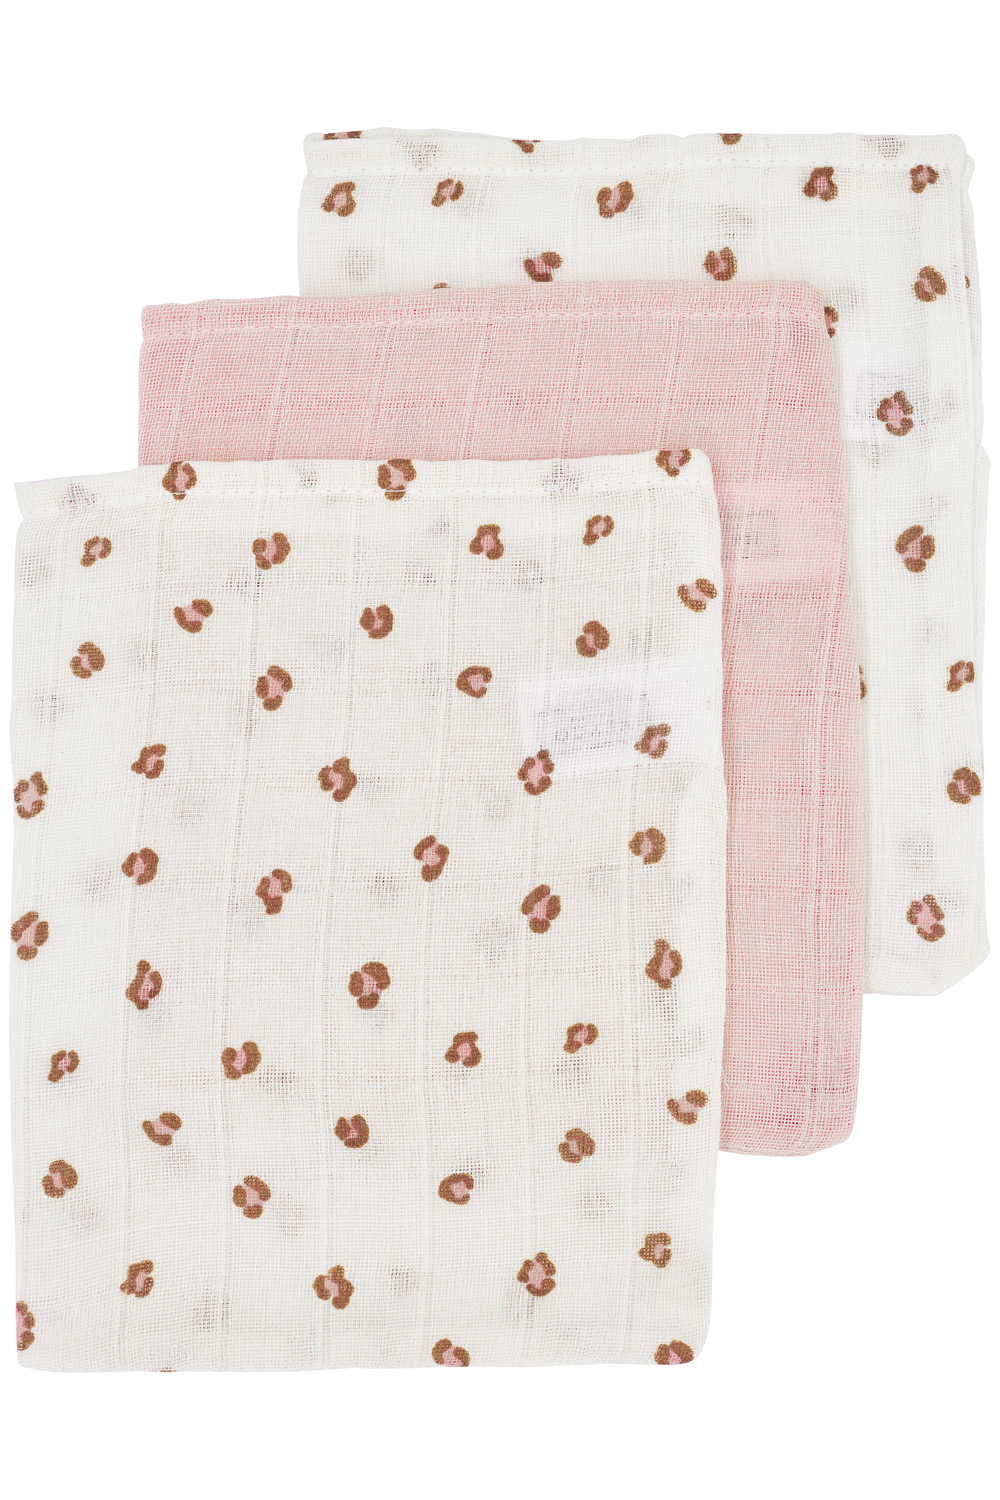 Muslin Wash mitts 3-pack Mini Panther - Soft Pink - 20x17cm